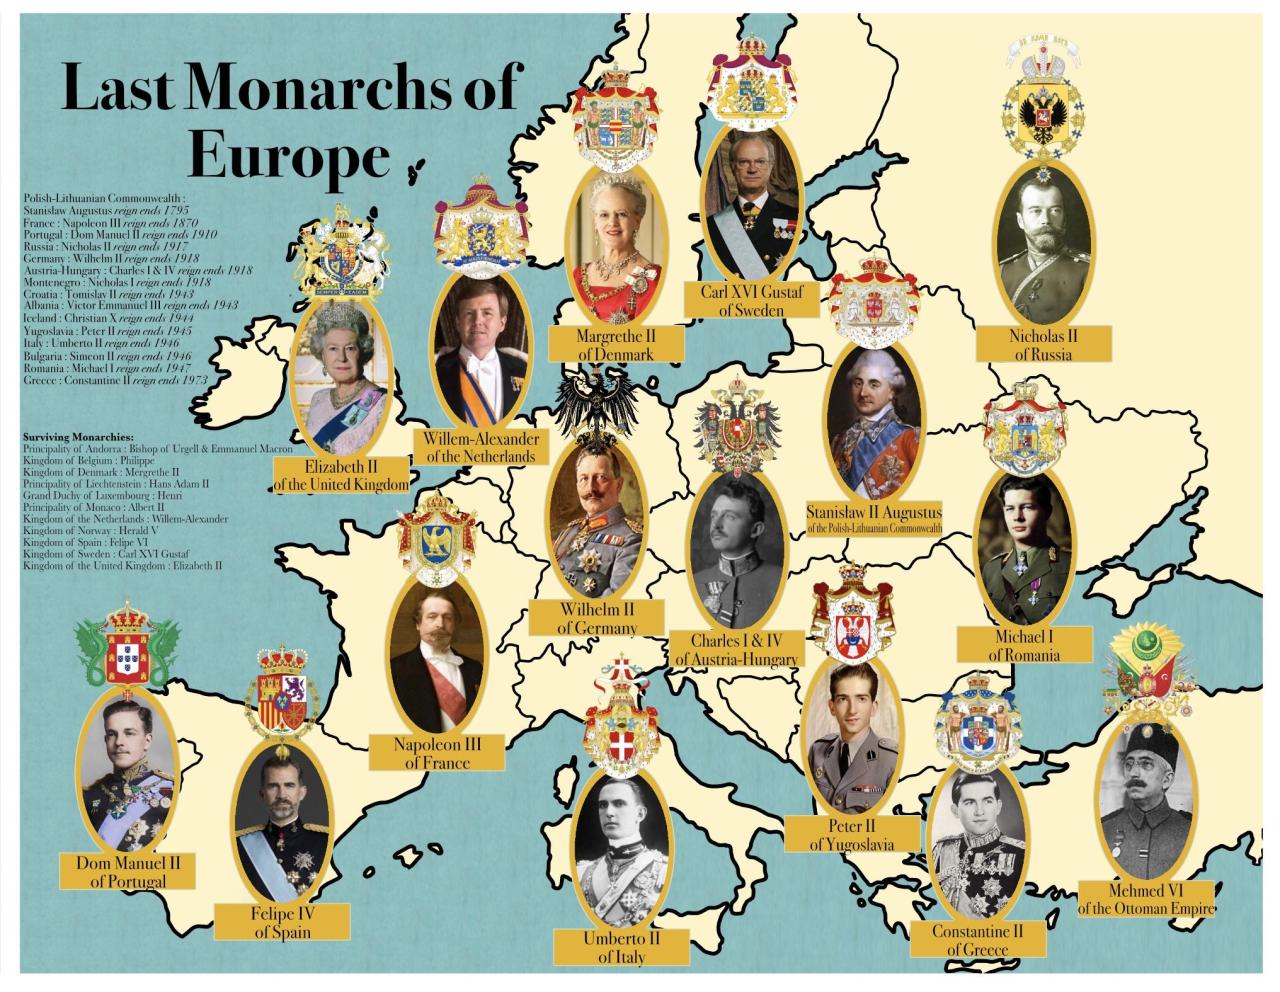 Last Monarchs of Europe - Maps on the Web